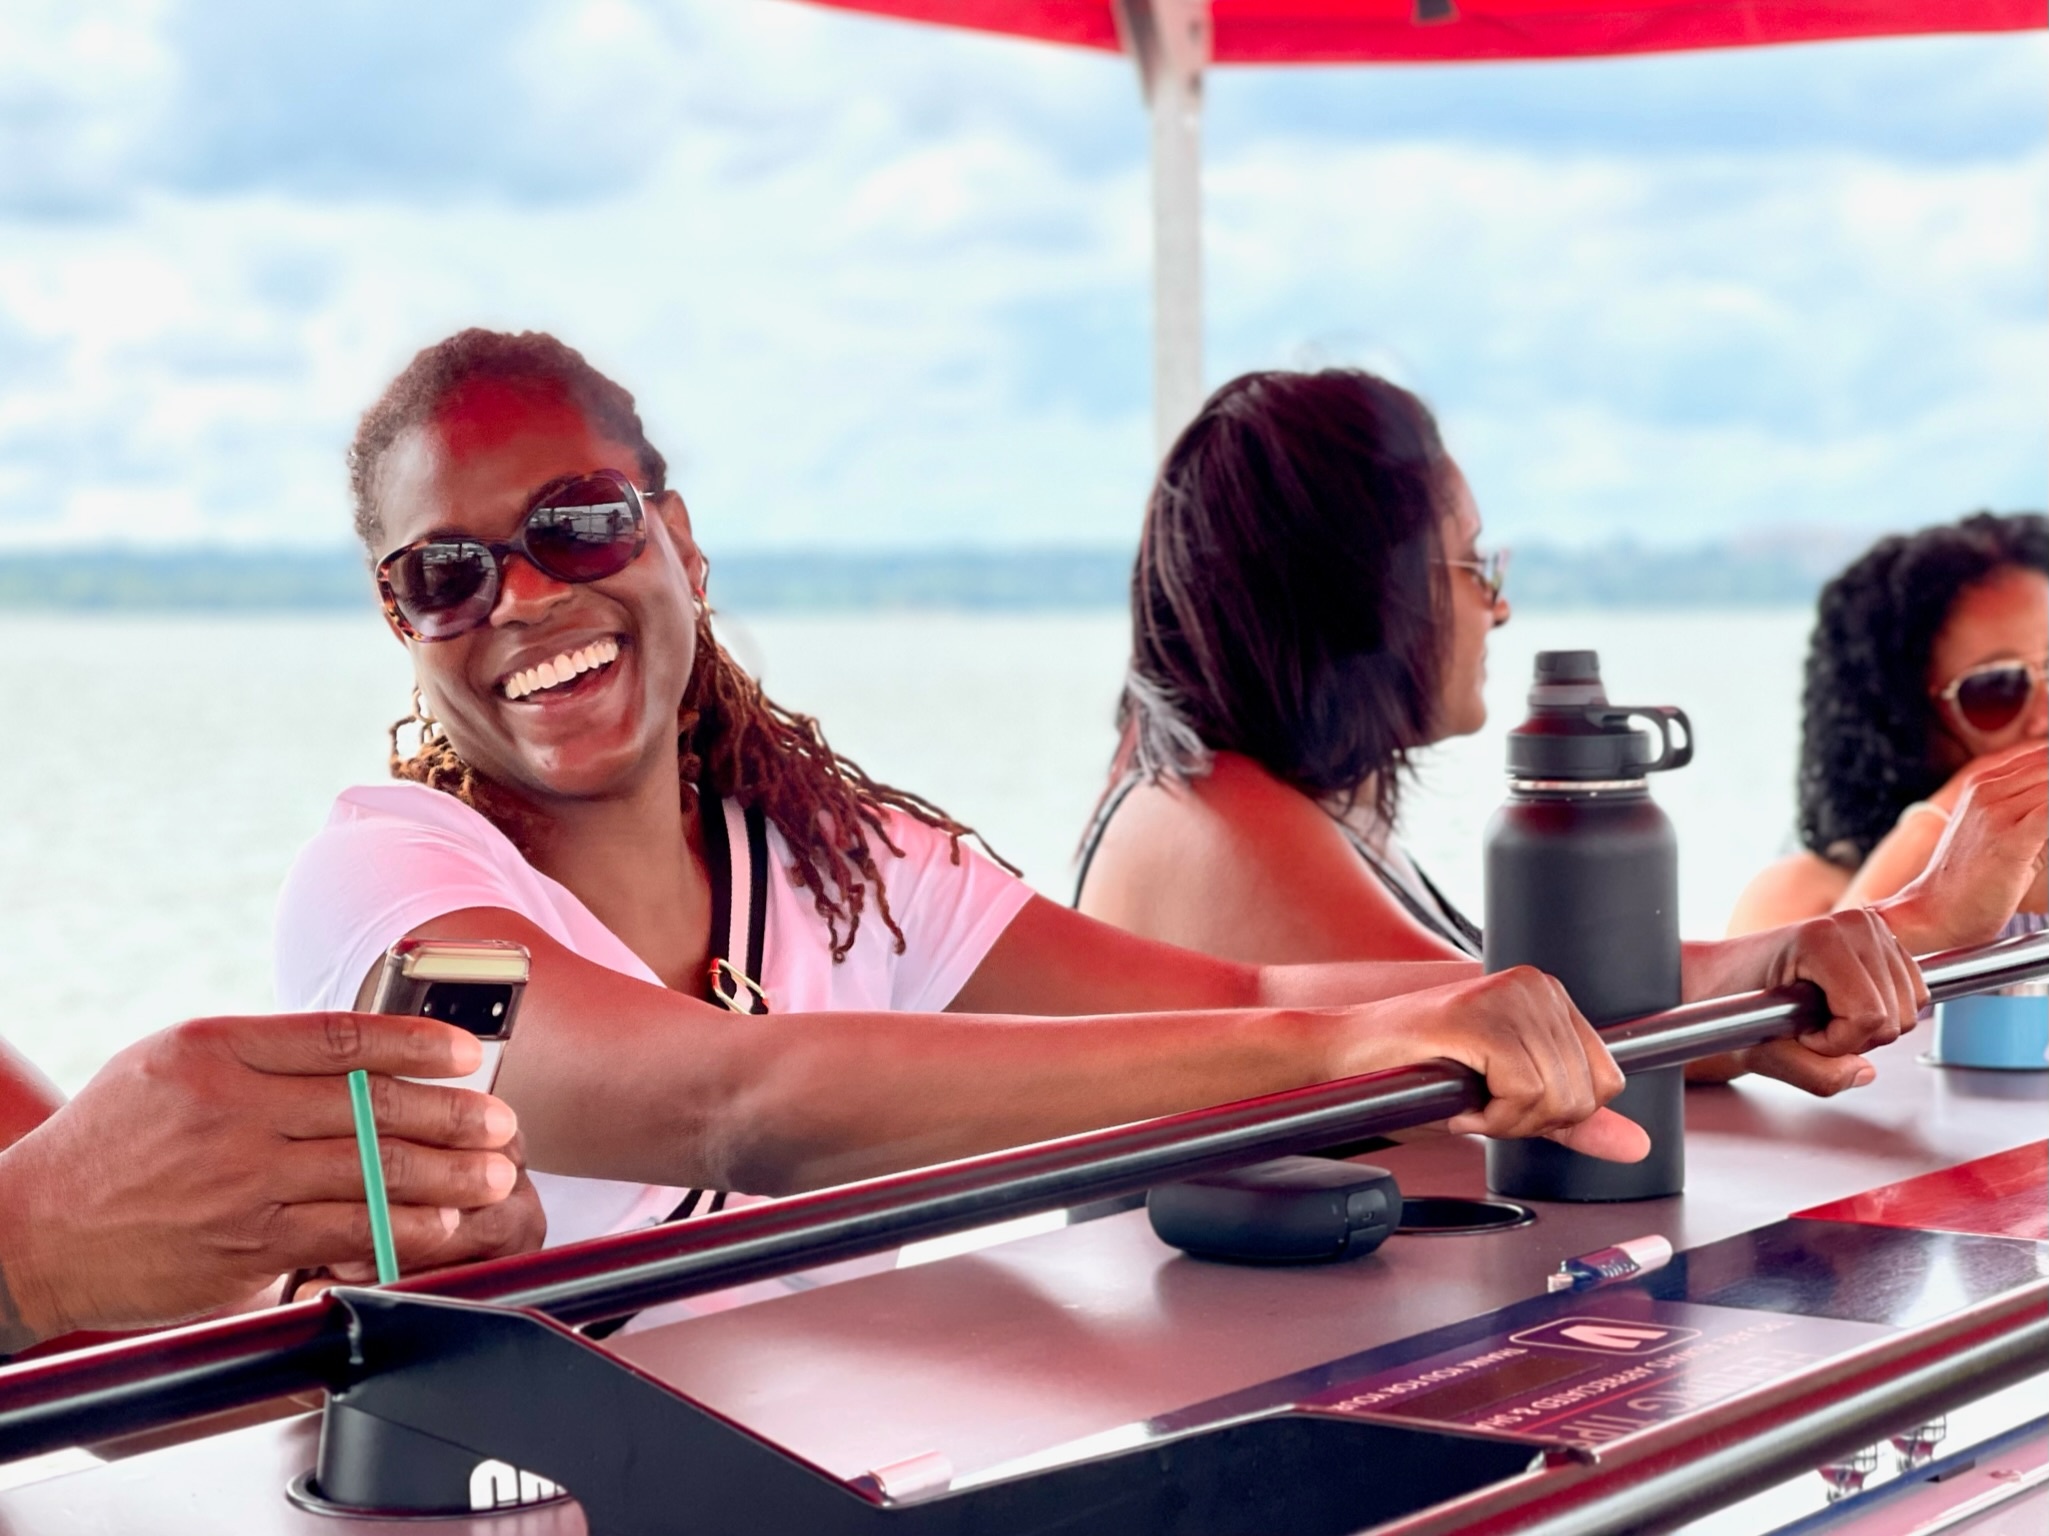 Thumbnail image for Private BYOB Paddle Boat Cruise at The Wharf: Enjoy Stunning Views & Explore DC's Exciting Waterfront Neighborhood